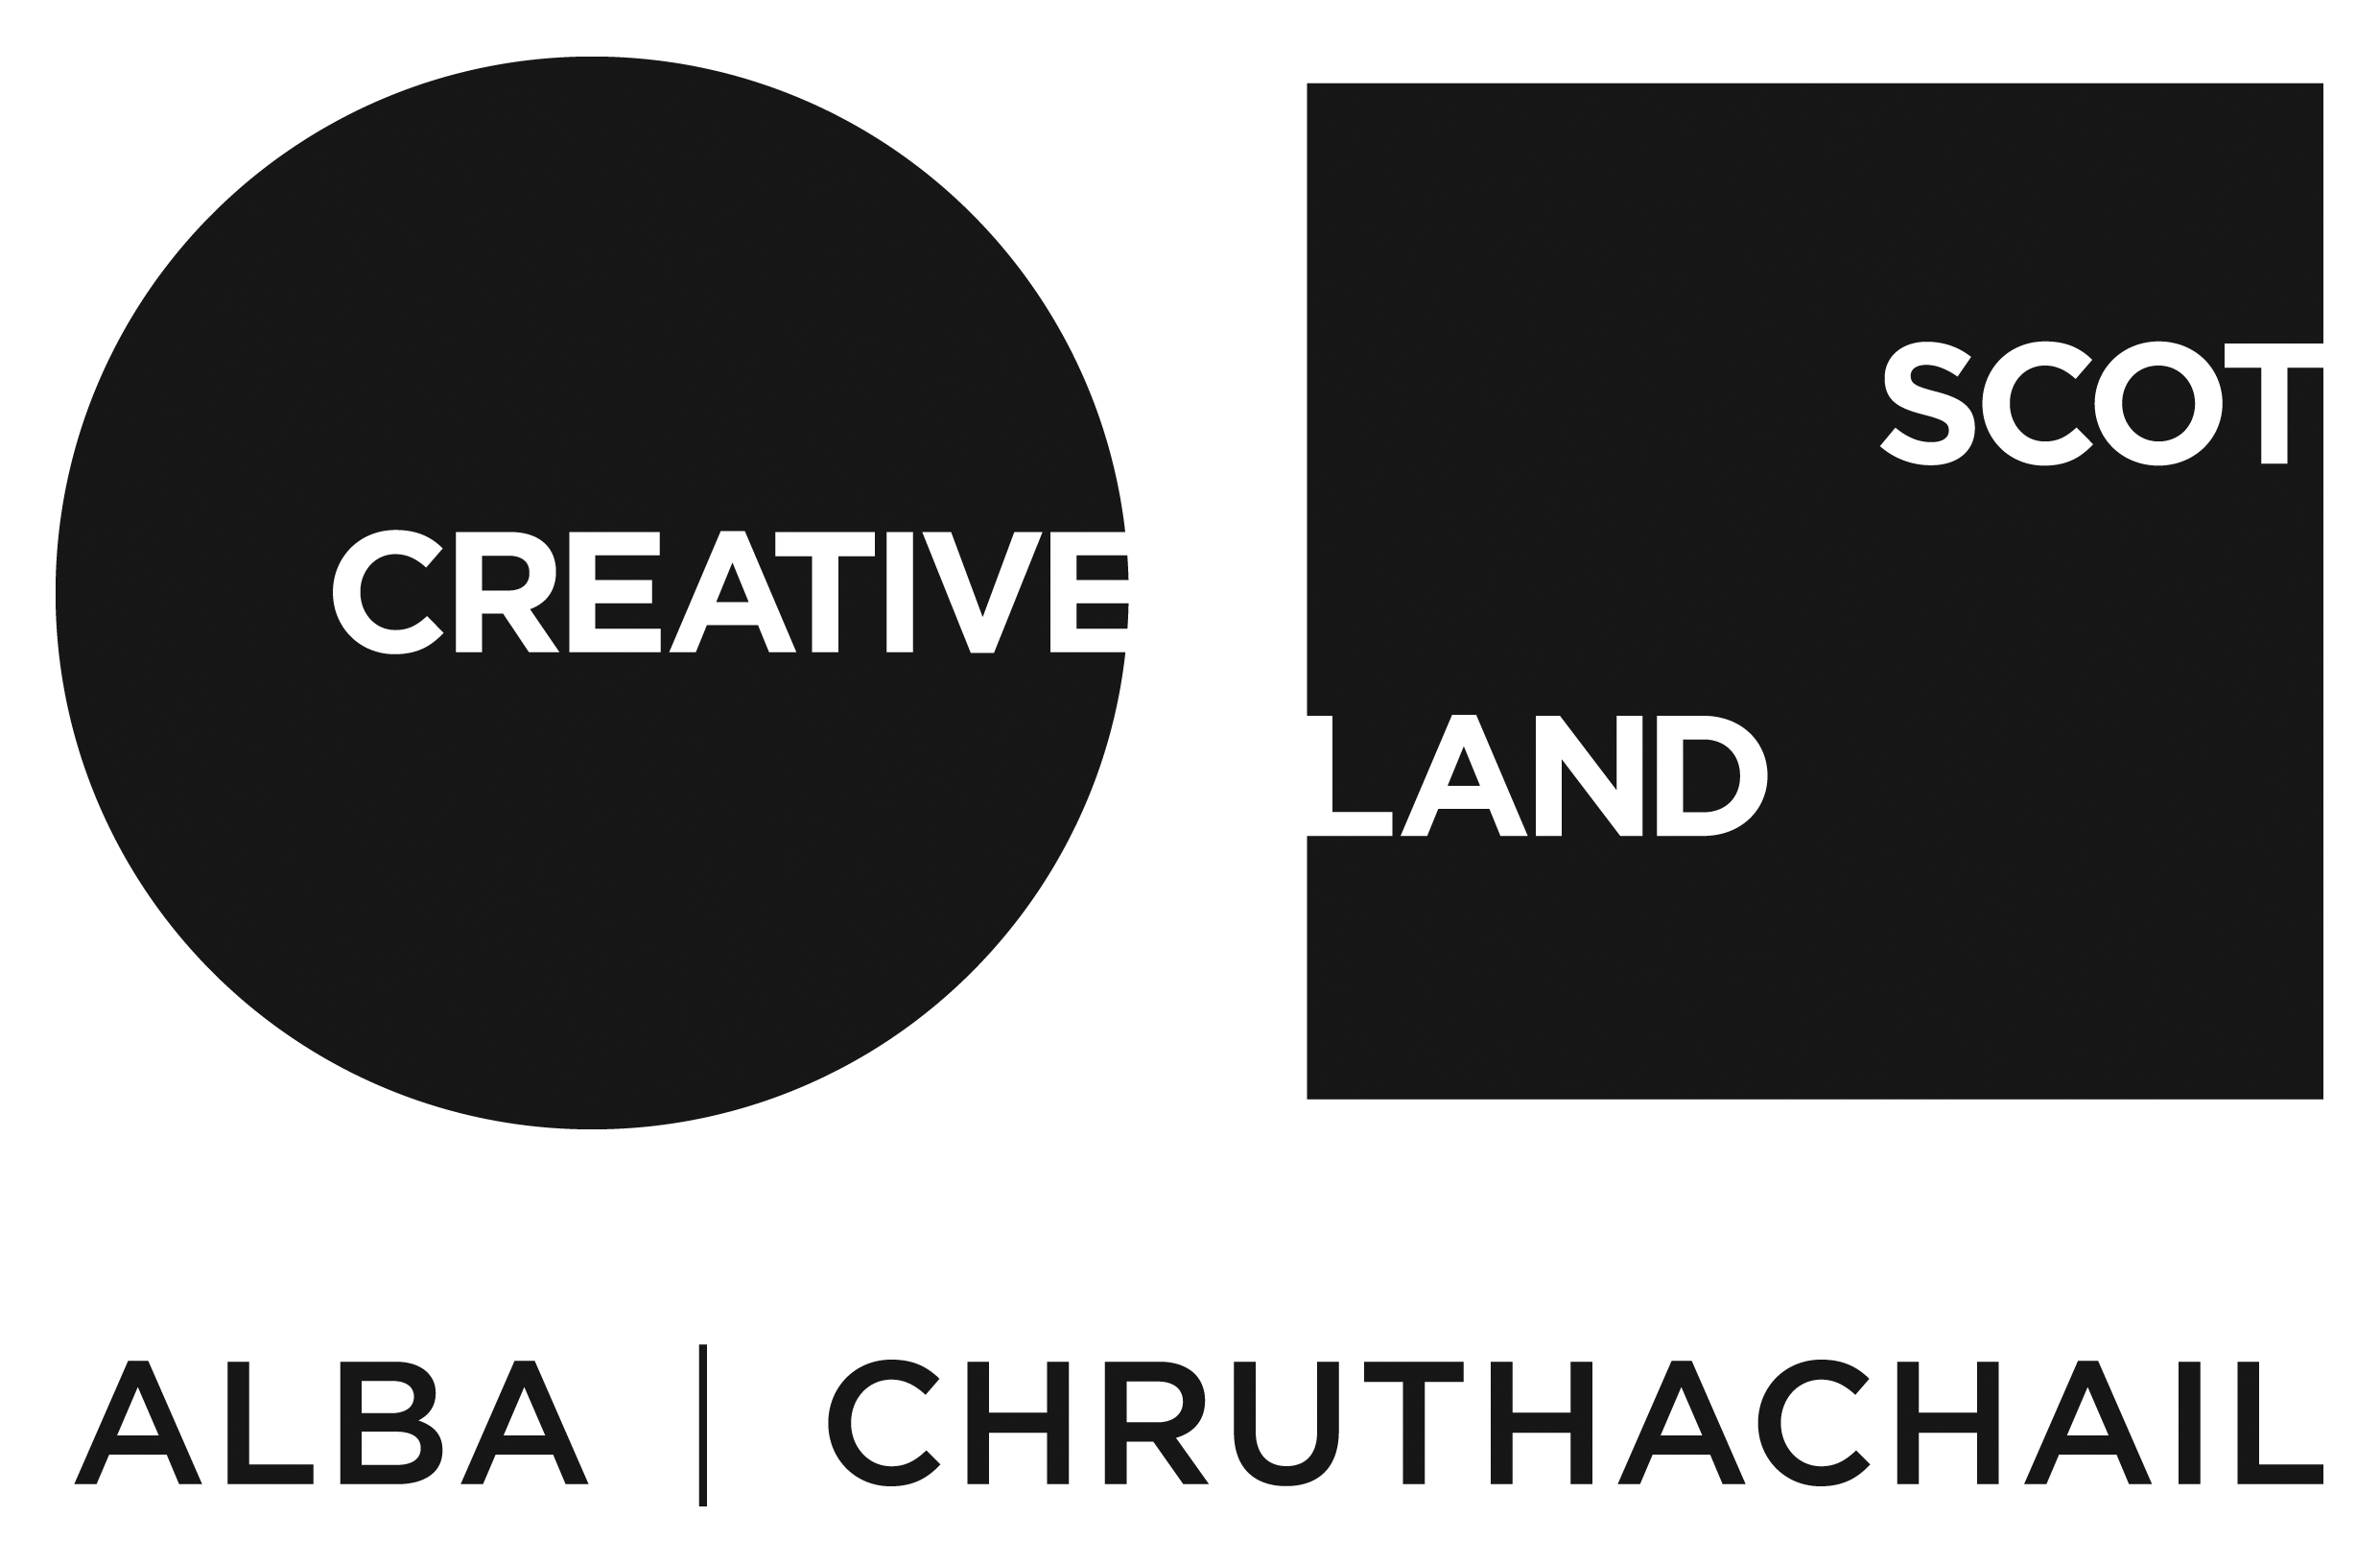 Supported by Creative Scotland